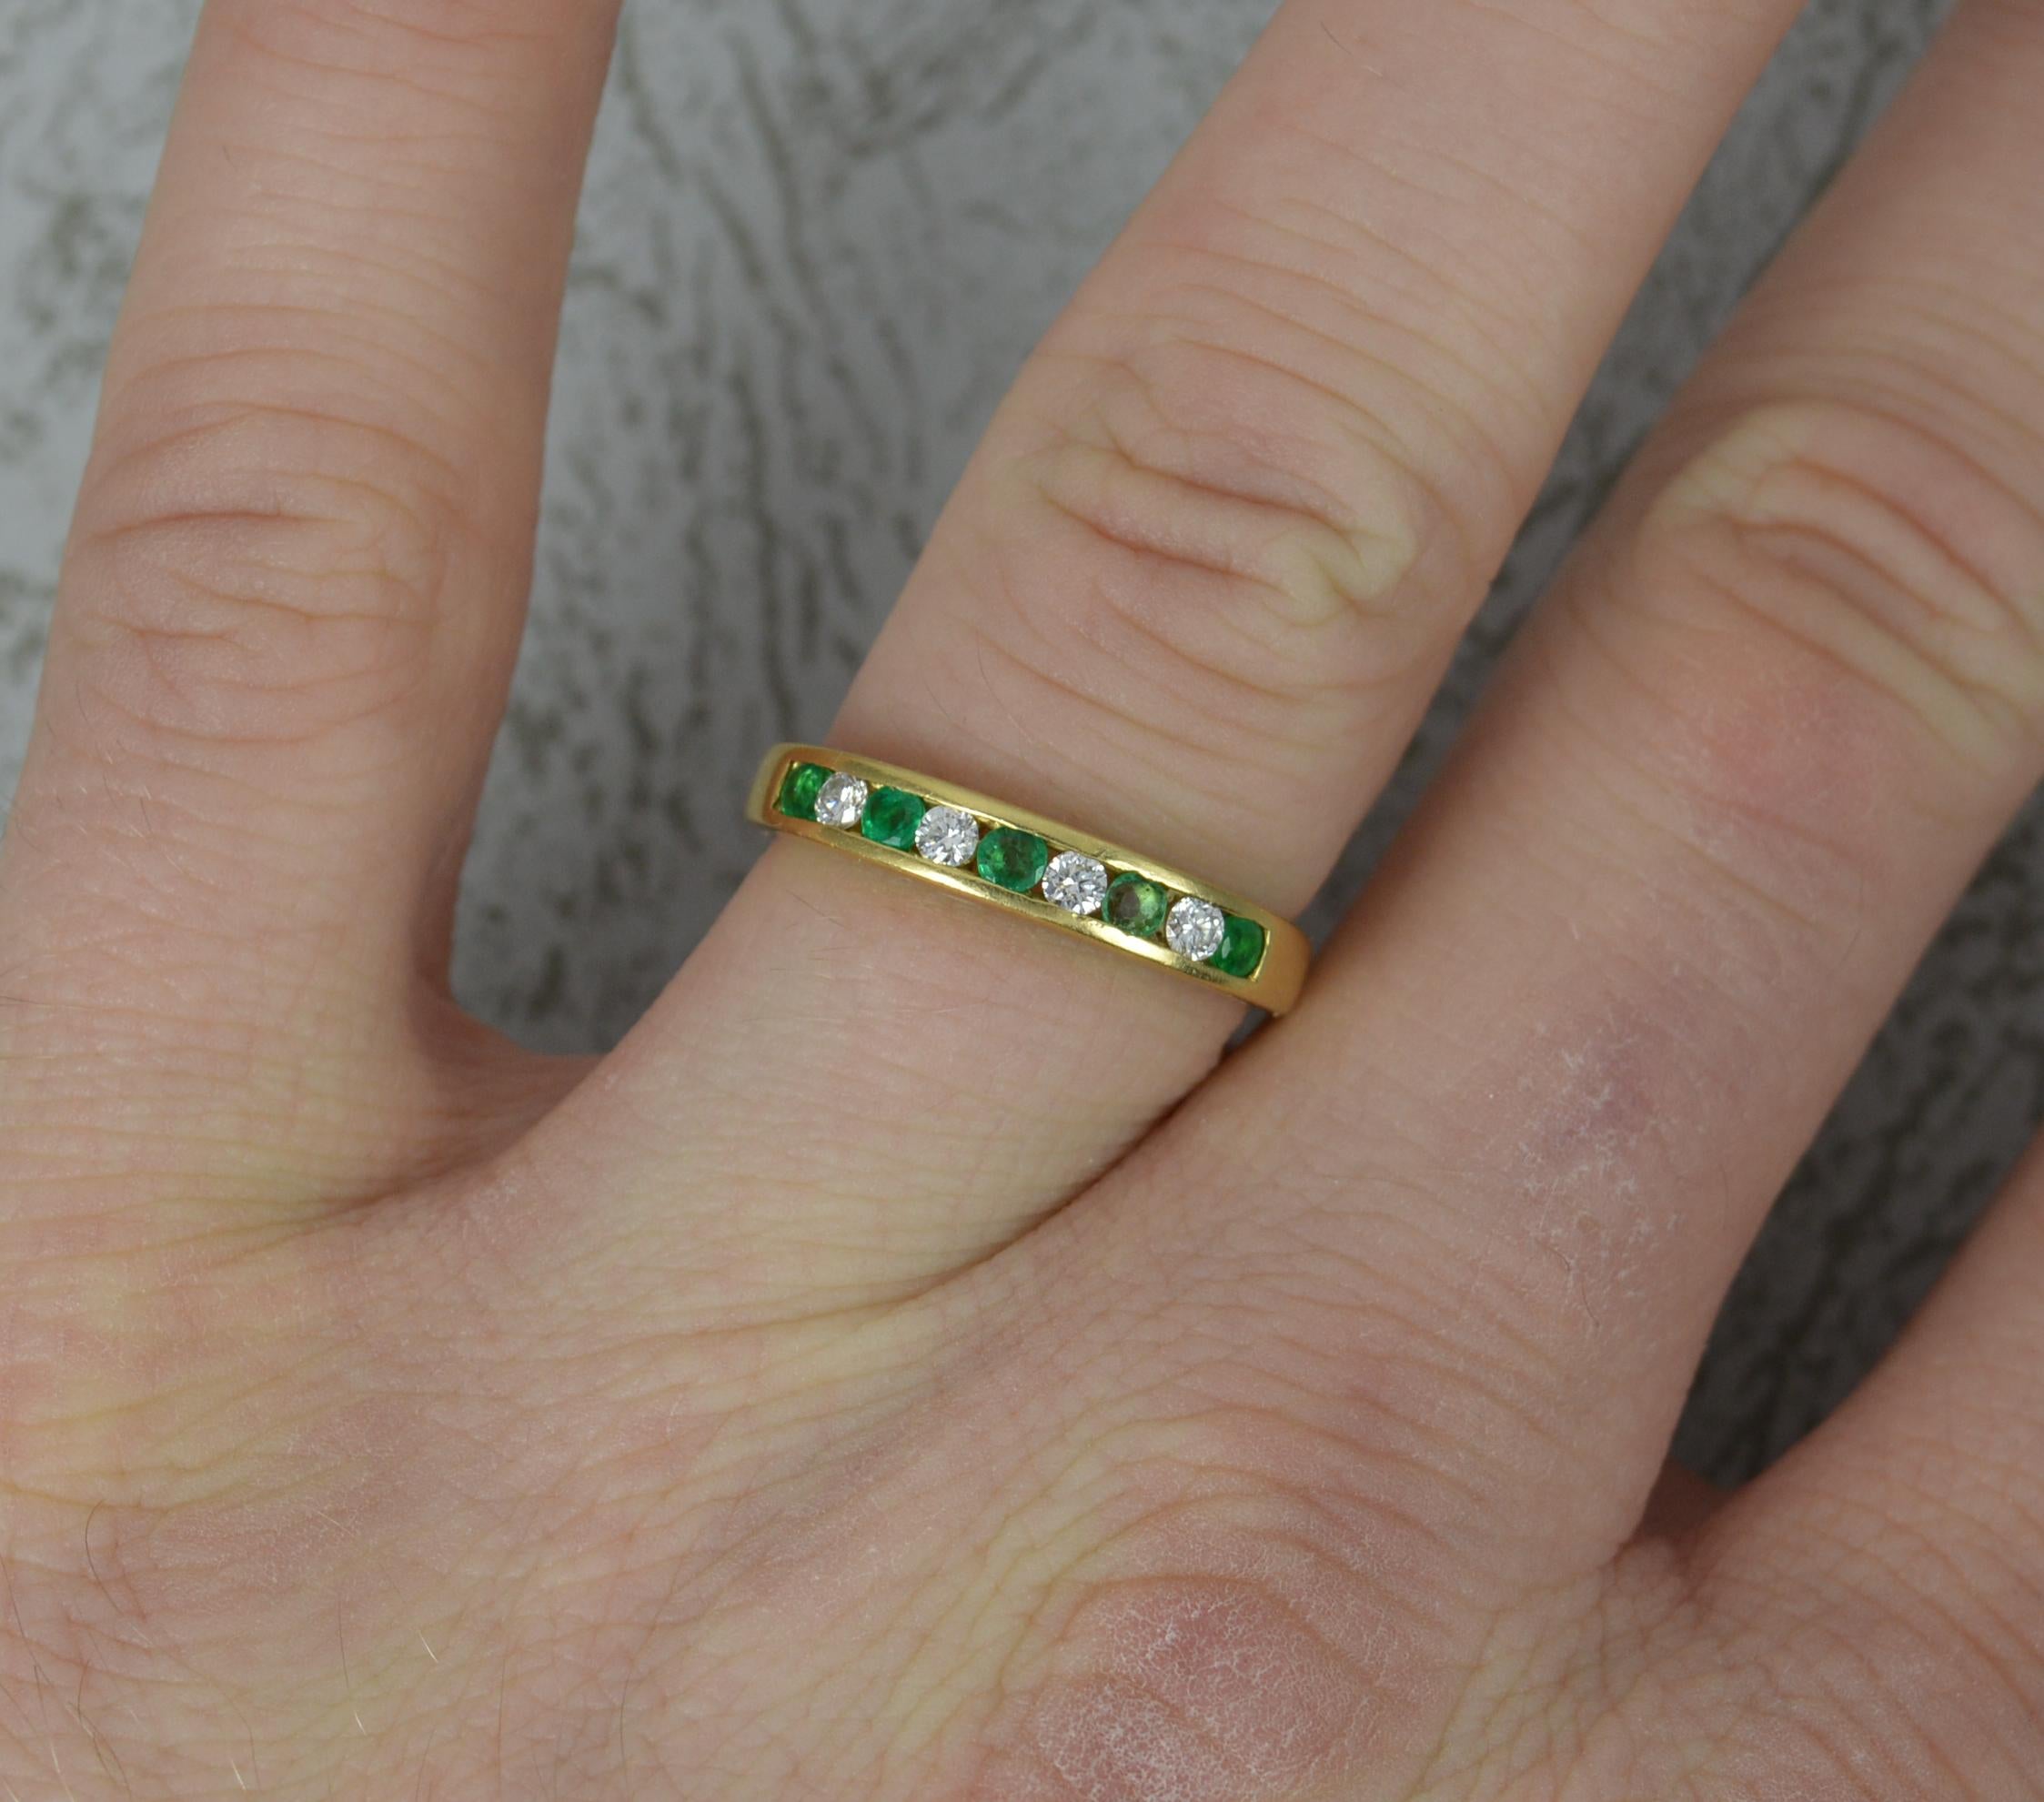 A beautiful half eternity, stack ring.
Solid 18 carat yellow gold example.
Designed with alternating natural round cut emerald and diamonds. Channel set. Very clean and sparkly diamonds, vs grade. Vibrant green emeralds. All natural.
17mm spread of